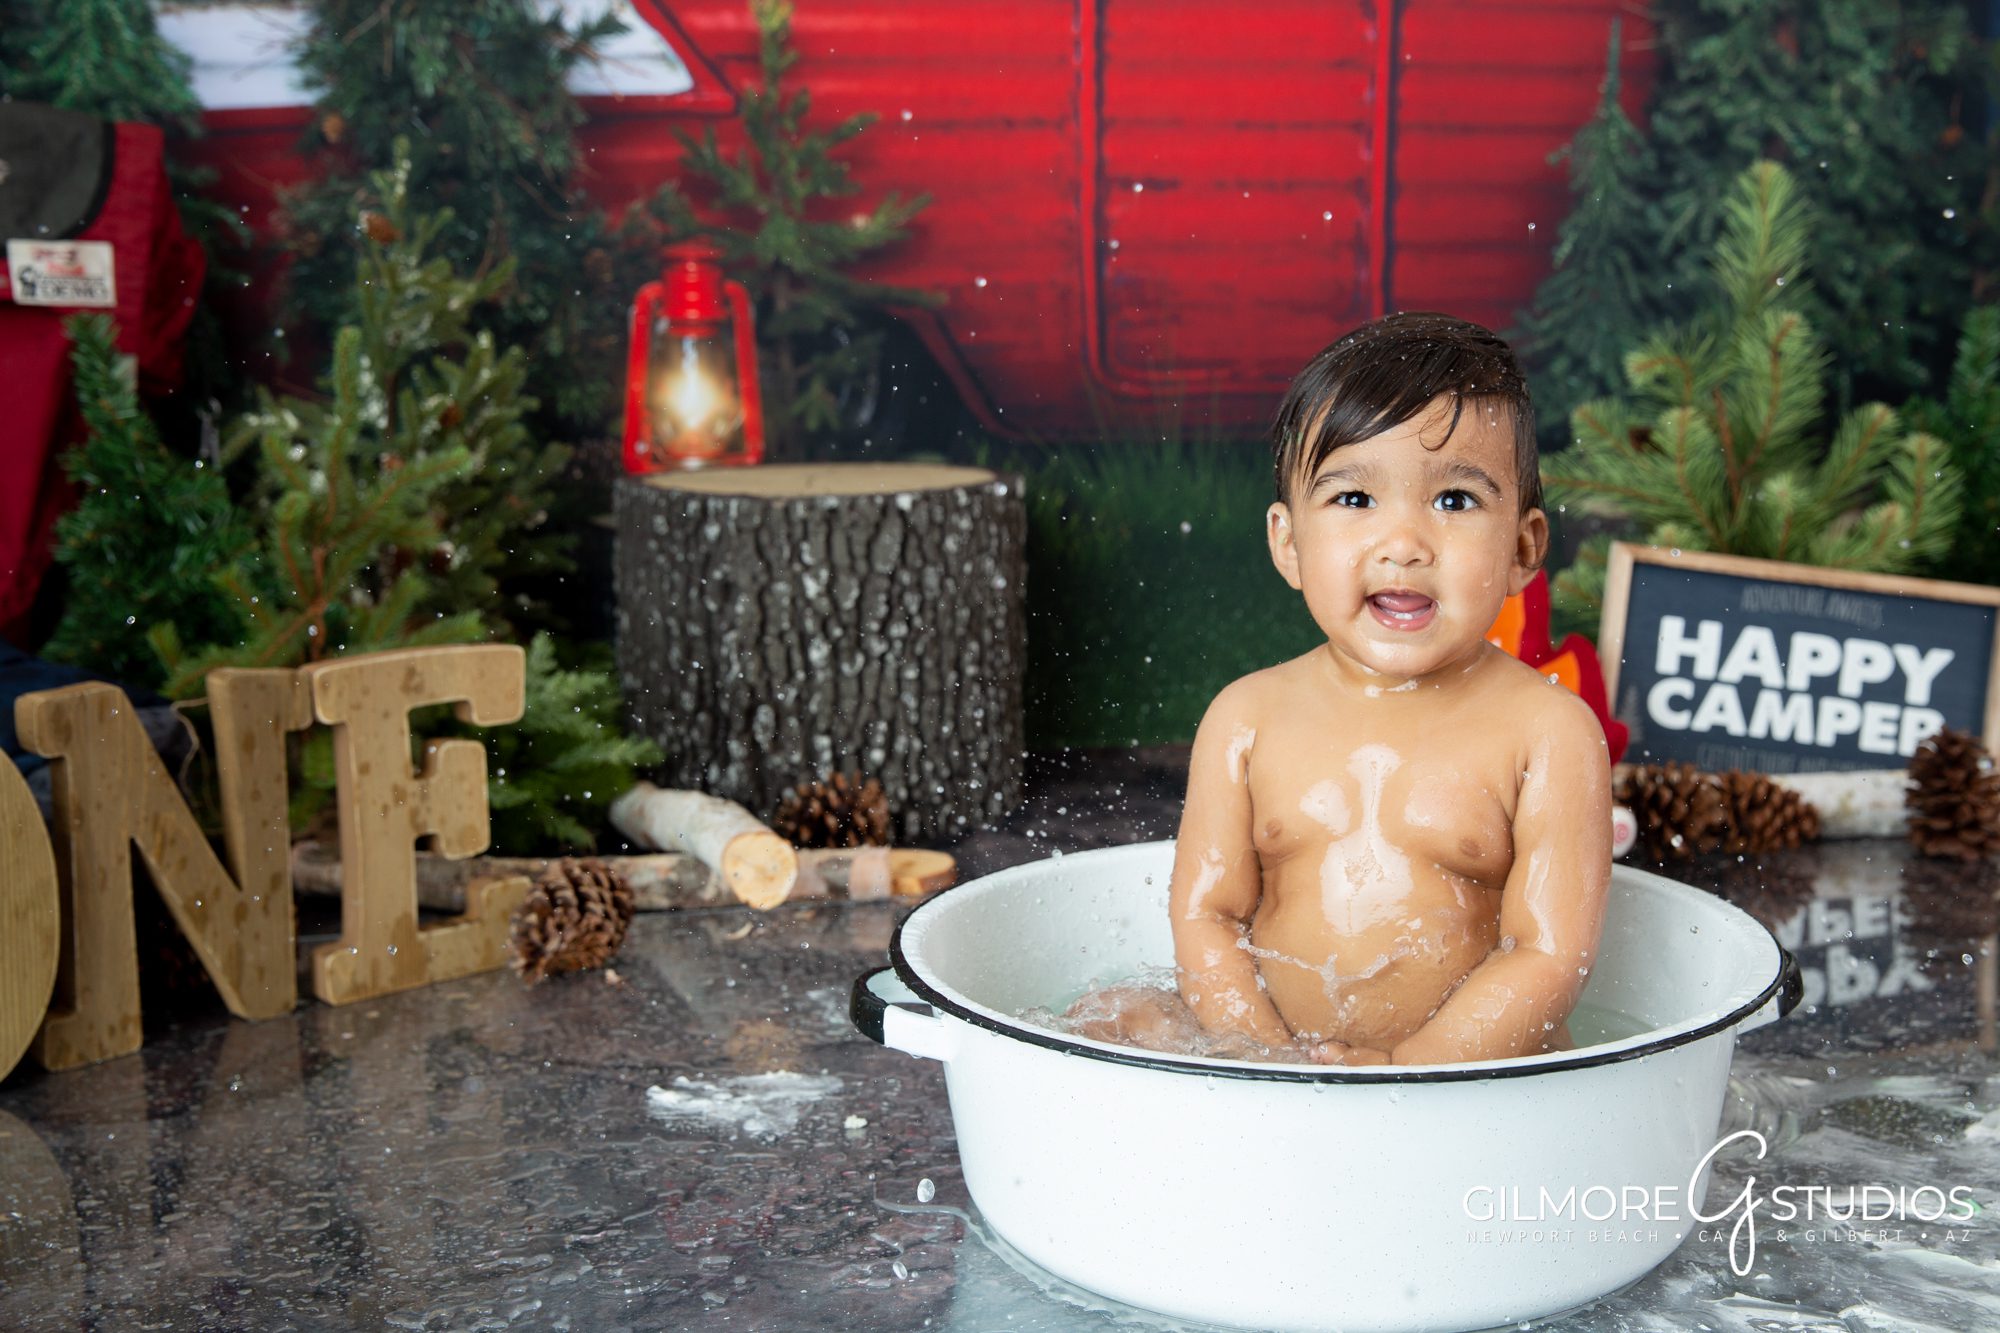 Camping themed cake smash by Gilmore Studios, camper, trailer, woods, forest, outdoors, camp fire, happy camper, pine trees, great outdoors, one year old, 1 year old, first birthday, photographer, background, set design, cakes, smashcake